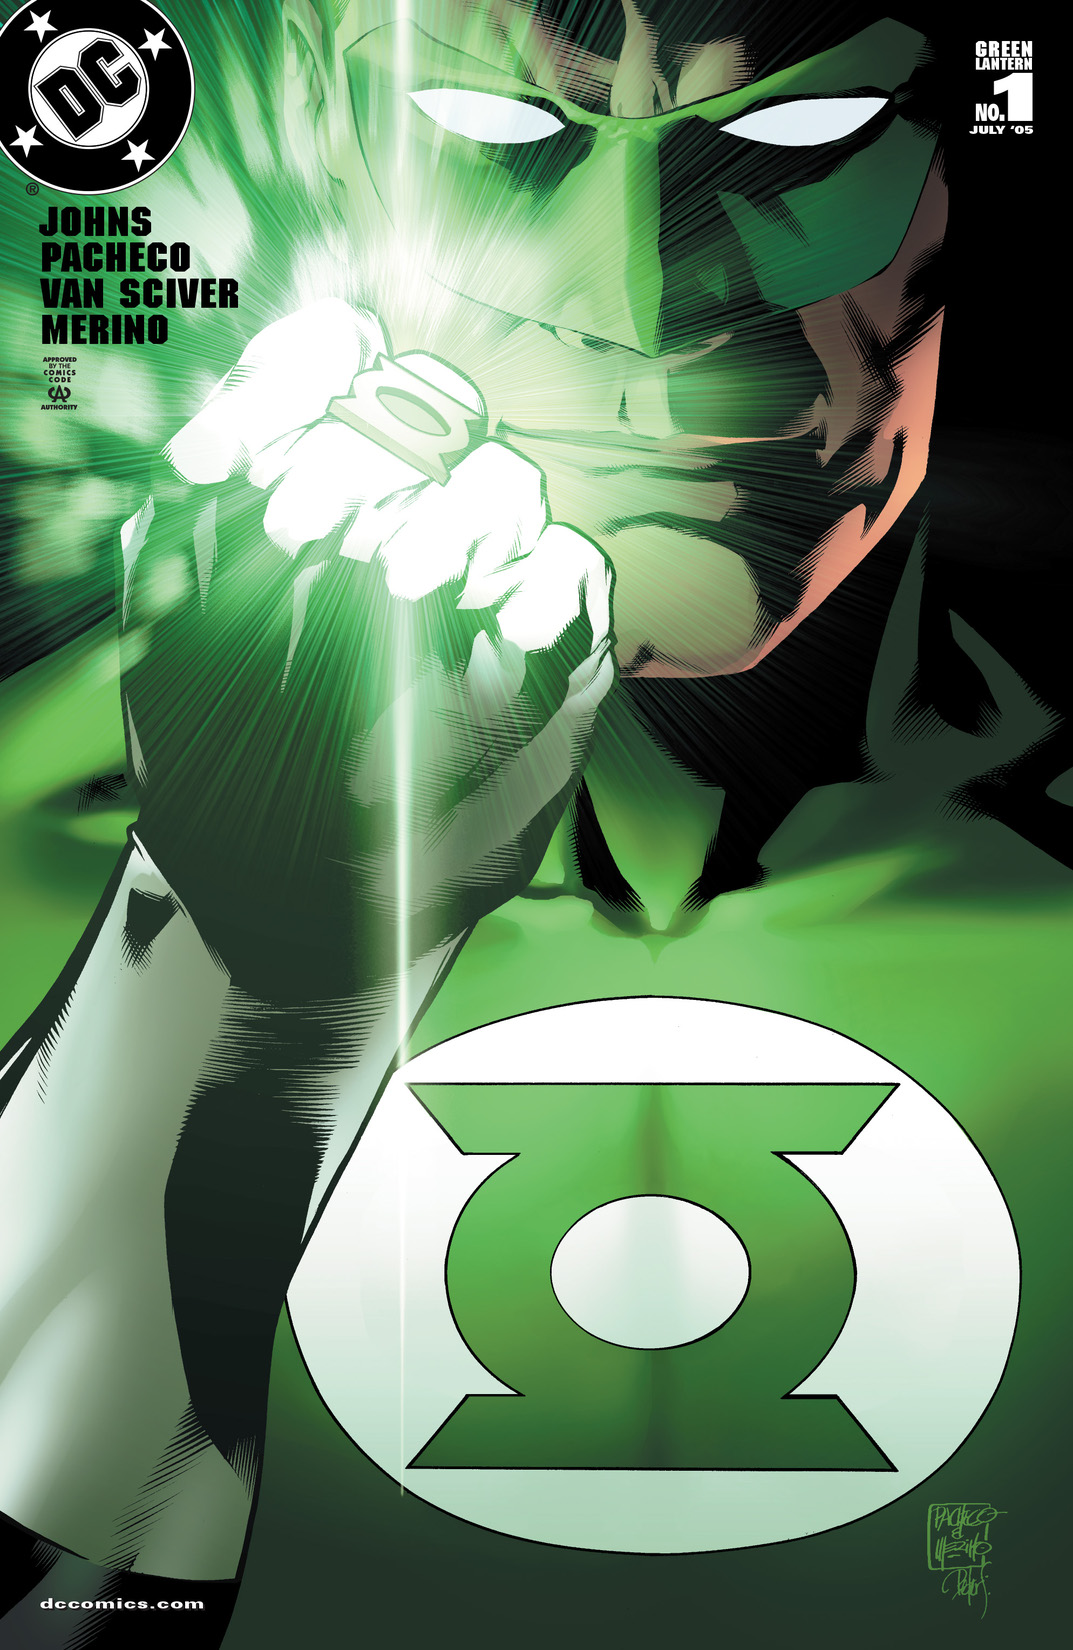 Green Lantern (2005-2011) #1 preview images